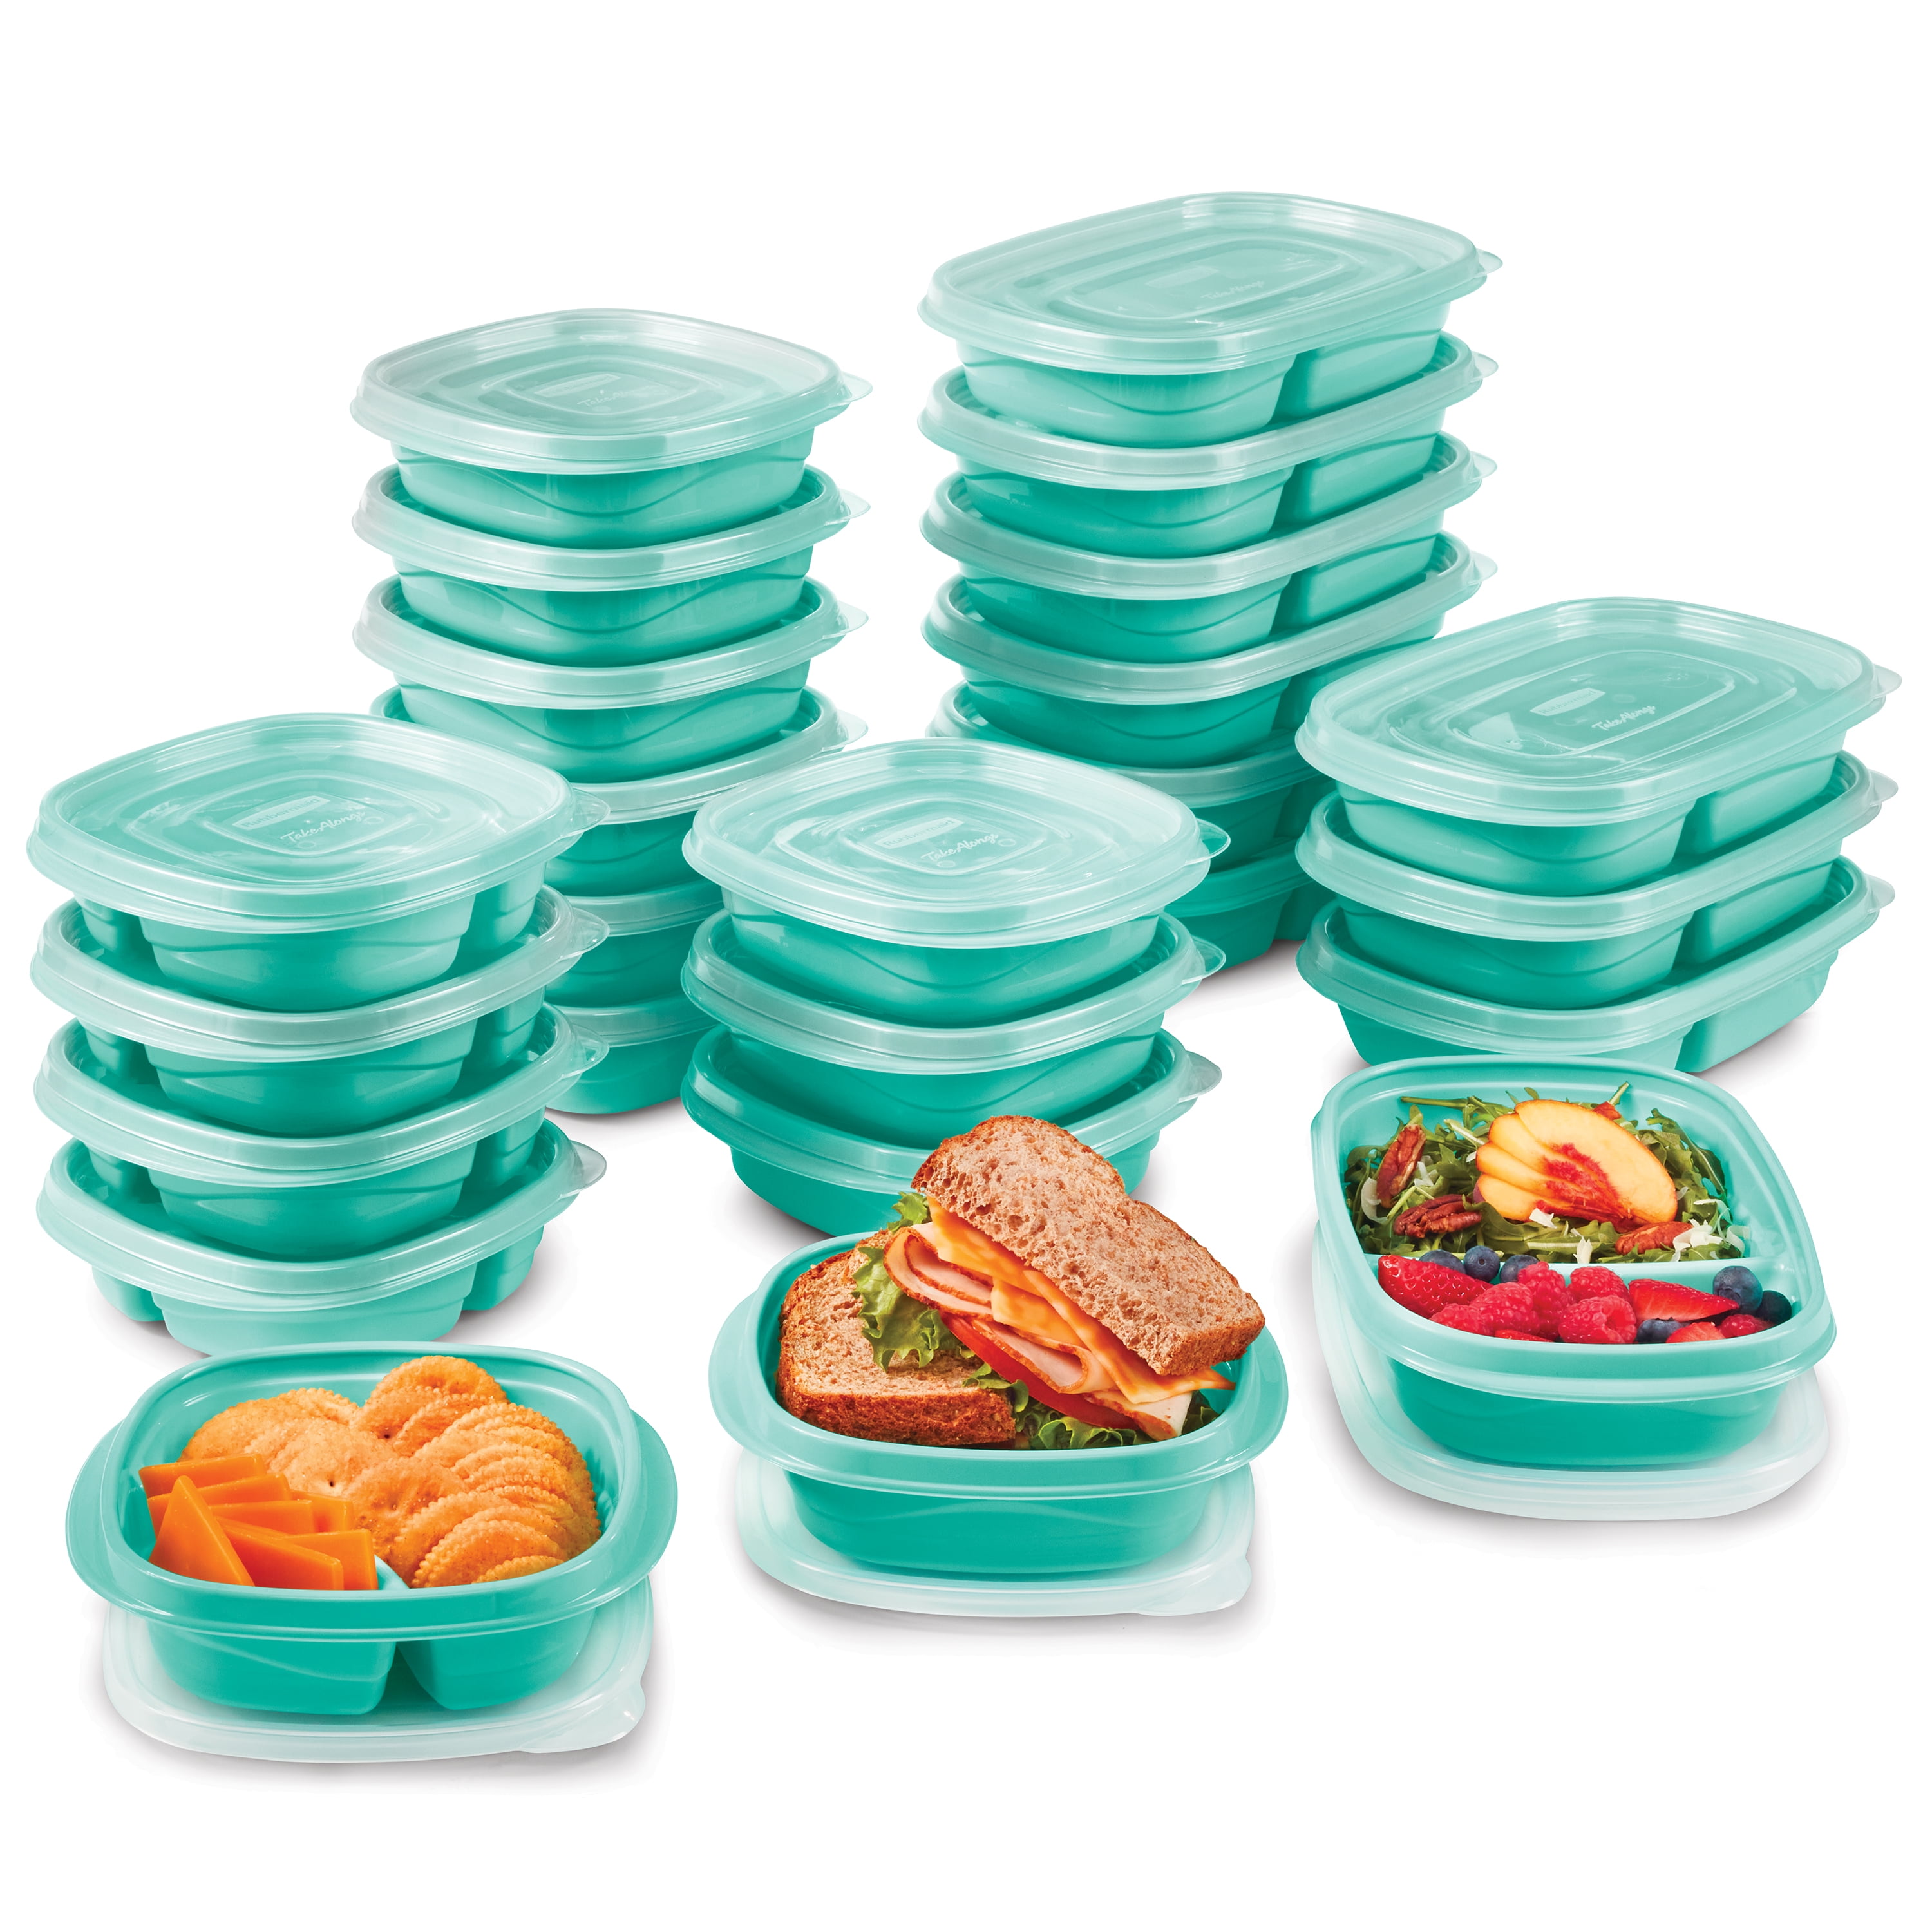 This Rubbermaid food storage set is our favorite, and it's now